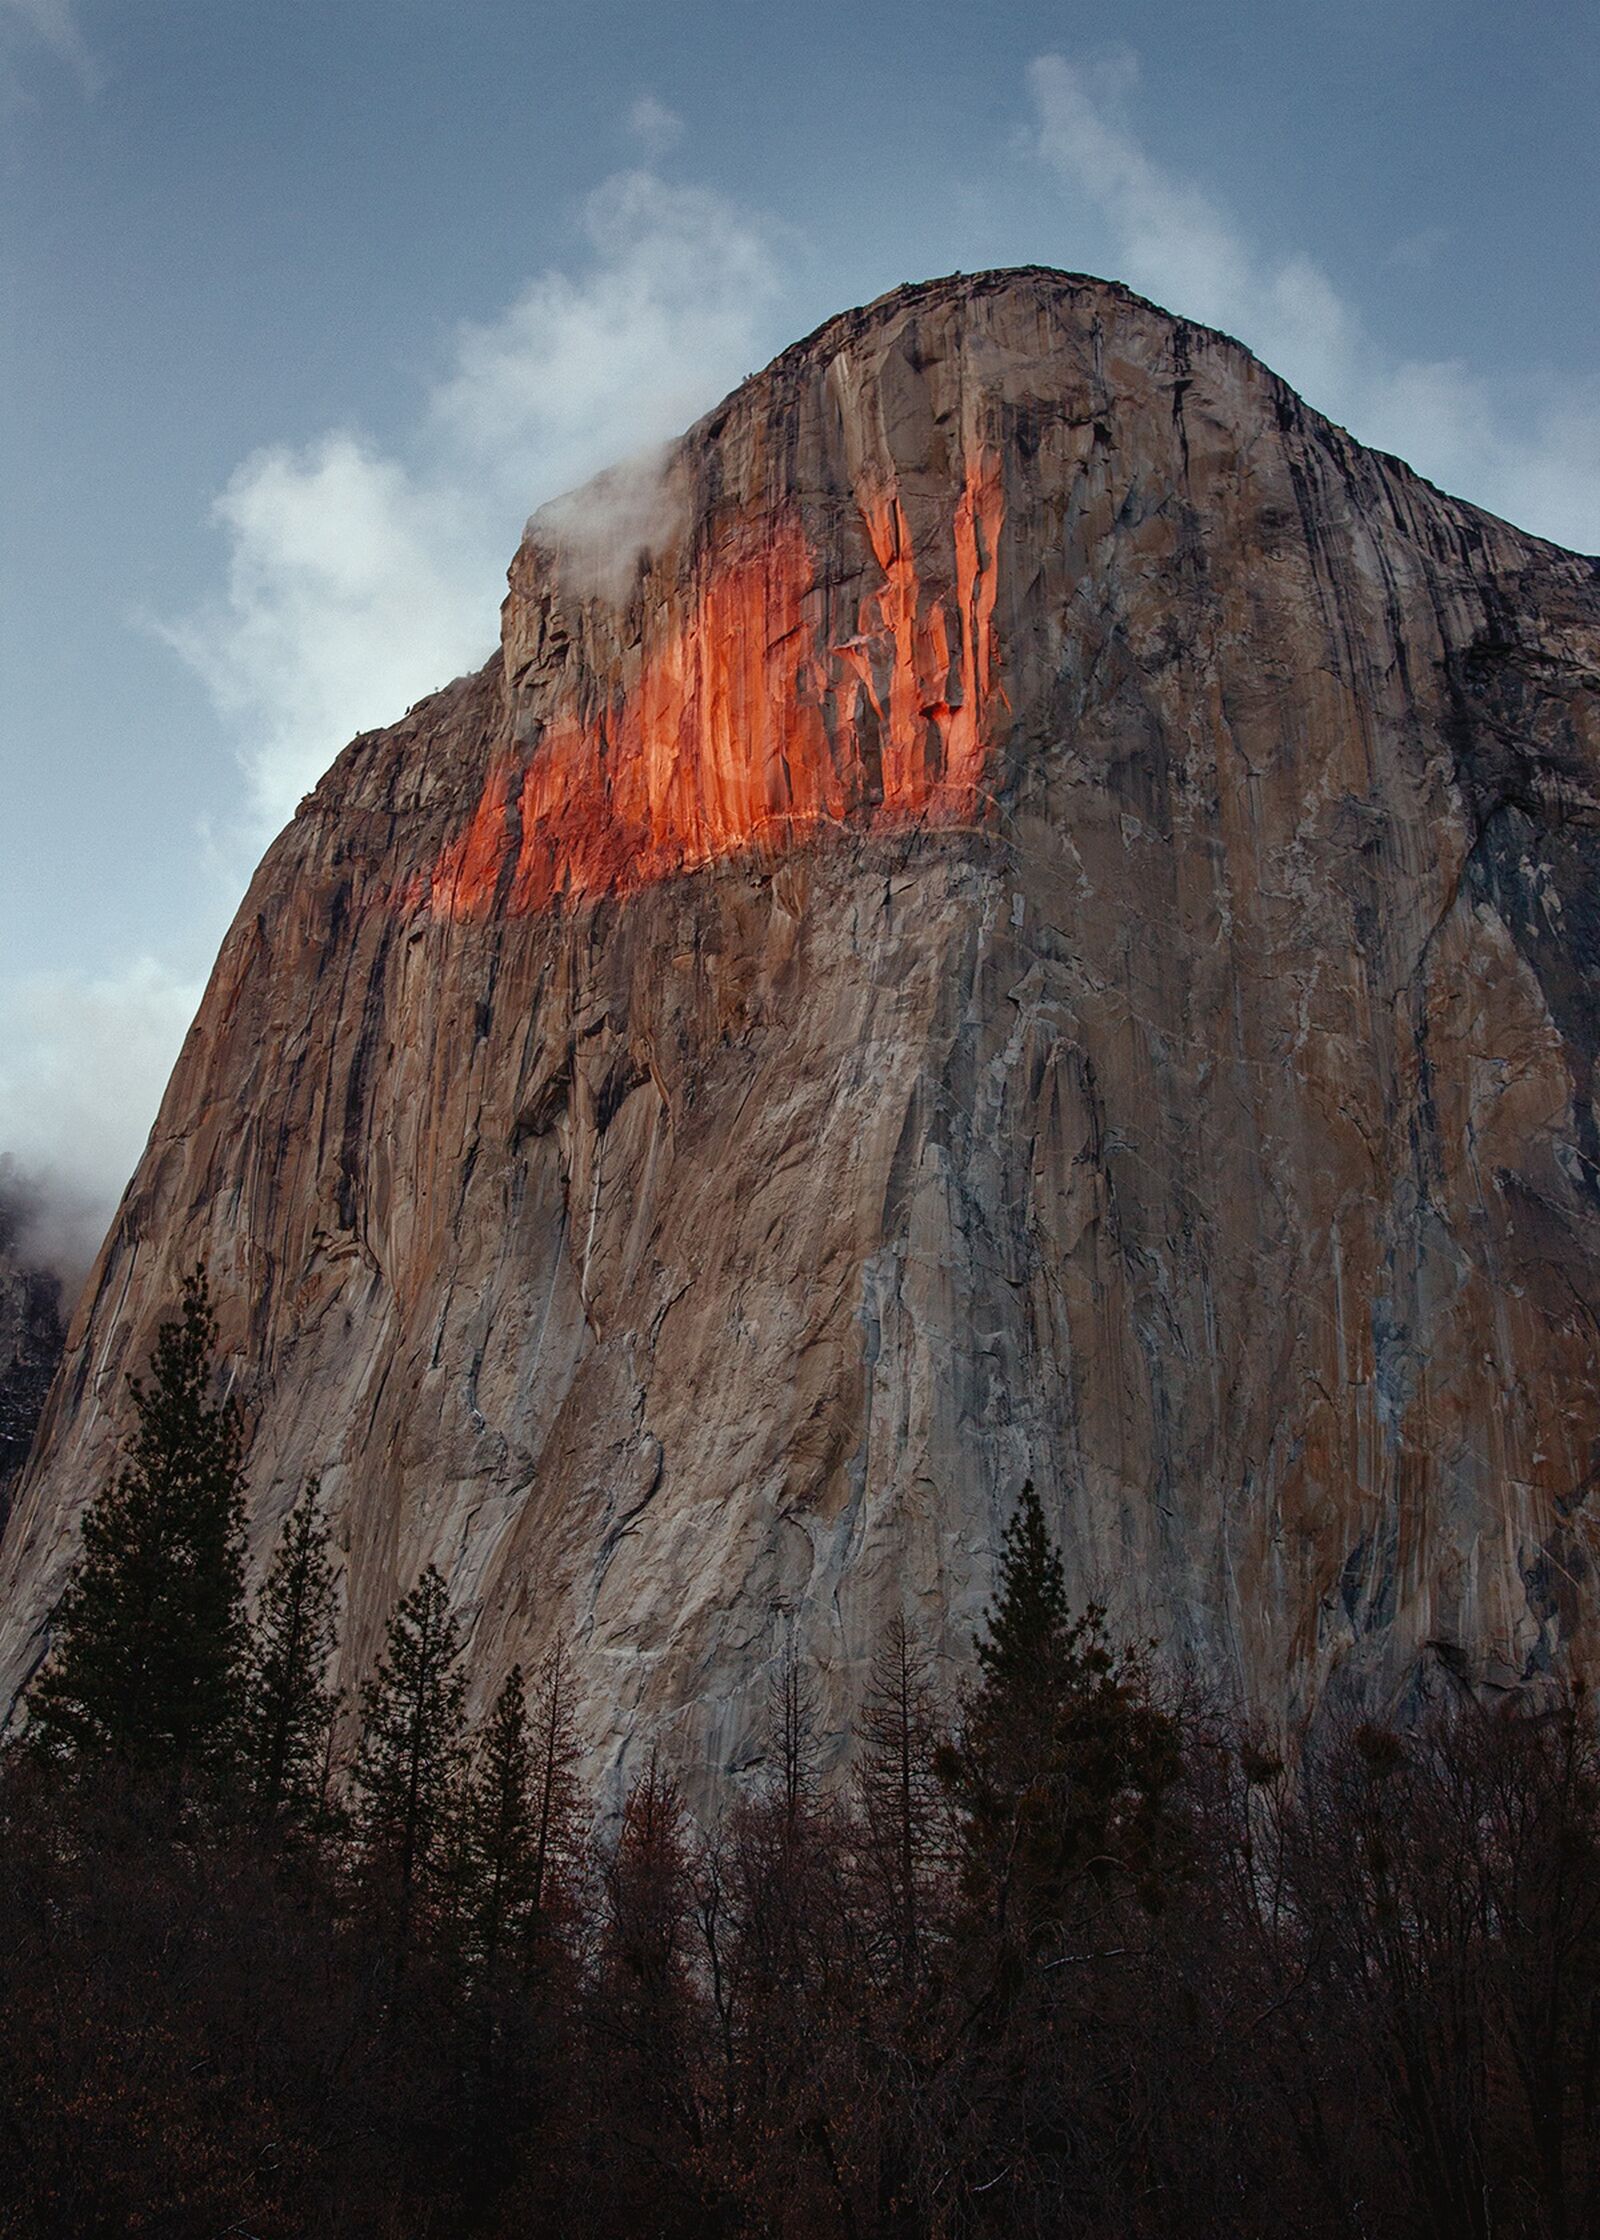 A red spotlight from the setting sun illuminates the upper portion of the face of El Capitan in Yosemite National Park